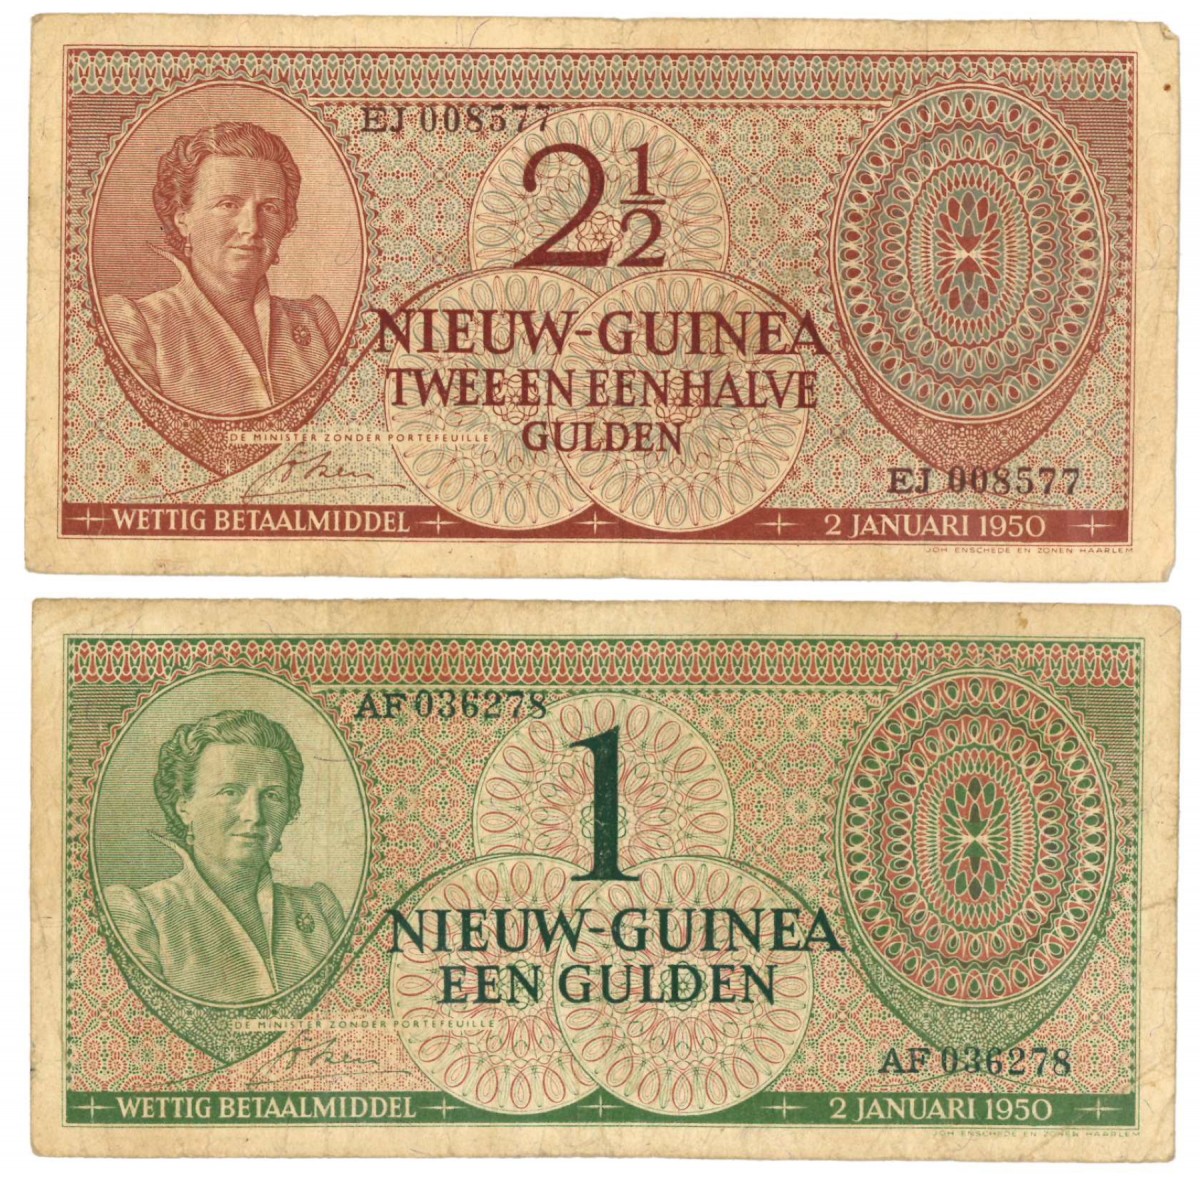 New Guinea 1 and 2½ gulden Banknote Type 1950 - Fine +.